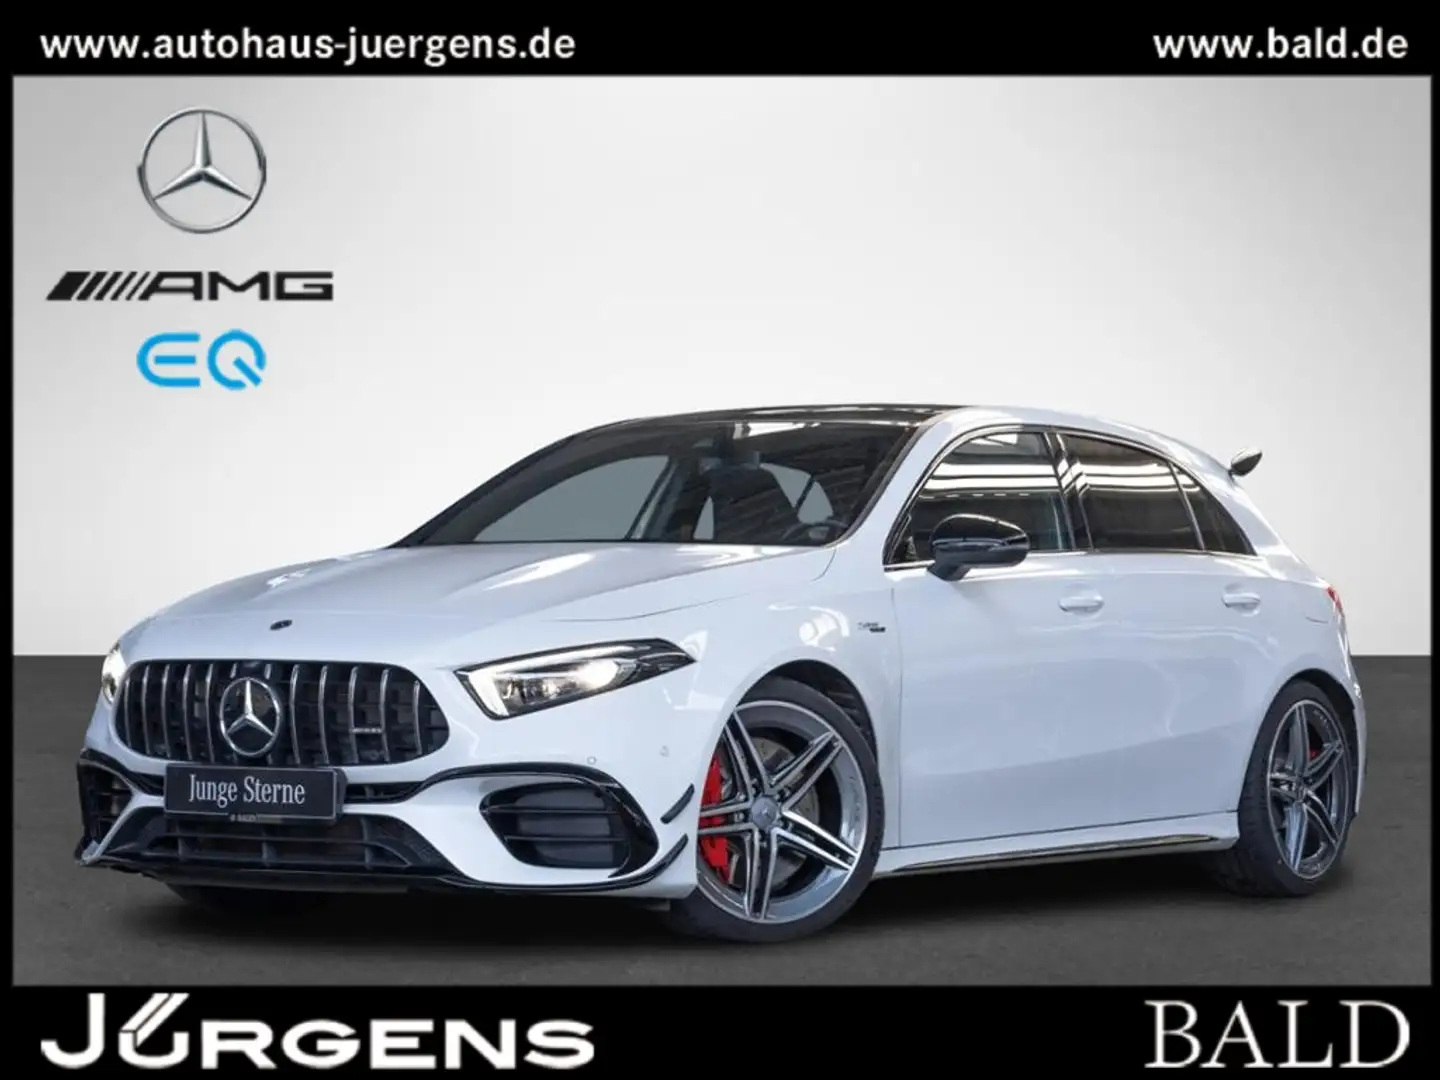 Mercedes-Benz A 45 AMG A 45 S AMG 4M+ Aero/Wide/ILS/Pano/Cam/Night/19" Wit - 2